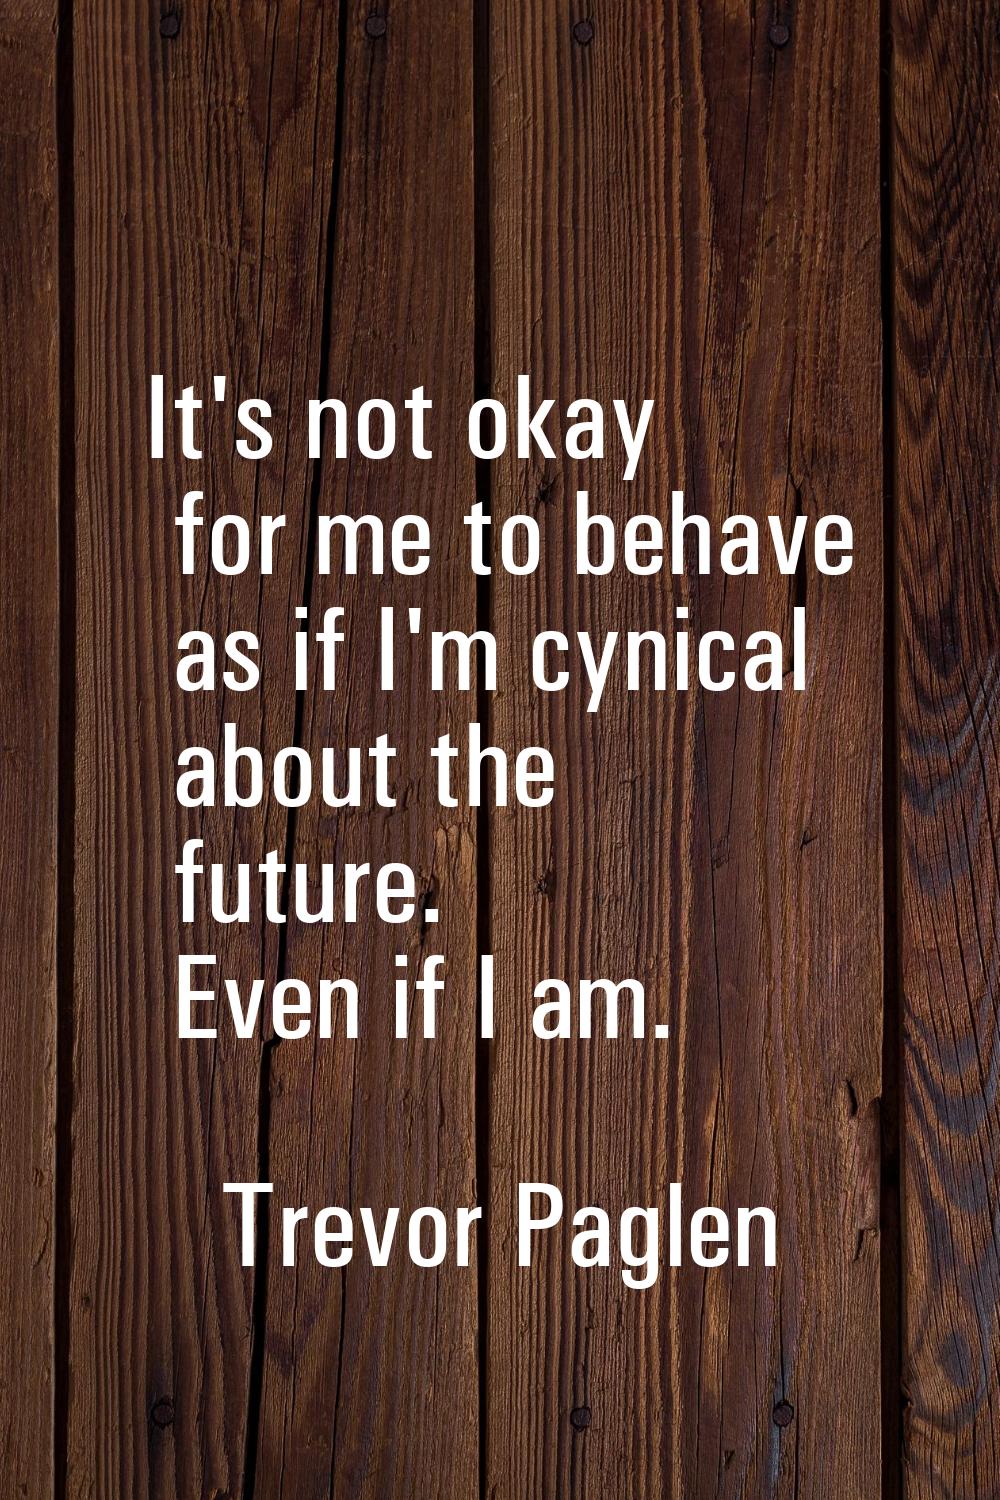 It's not okay for me to behave as if I'm cynical about the future. Even if I am.